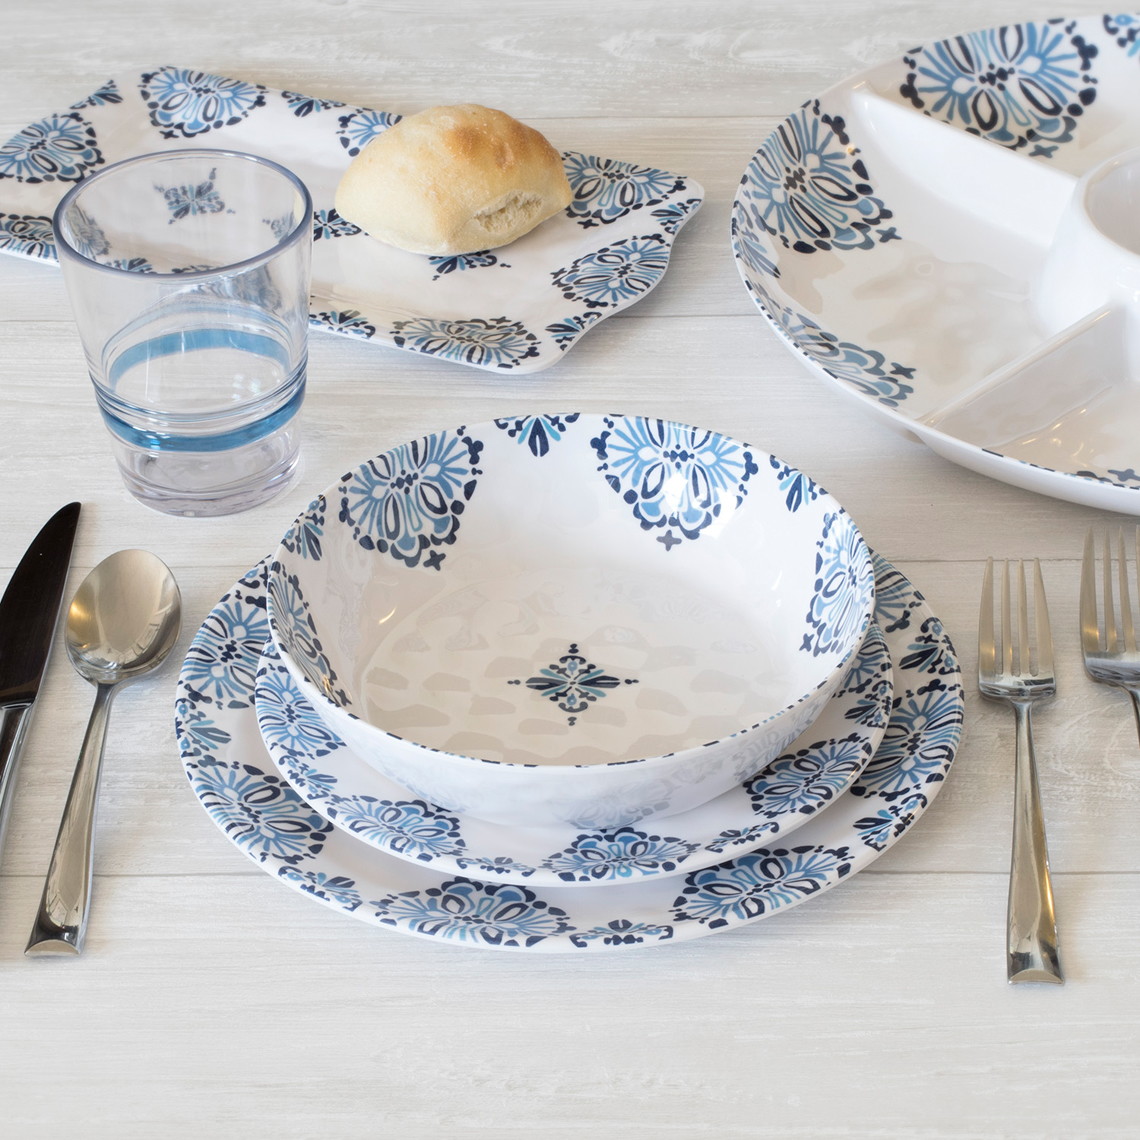 Better Homes & Gardens 12-Piece Dinnerware Set - $25 at Walmart! - The Krazy Coupon Lady